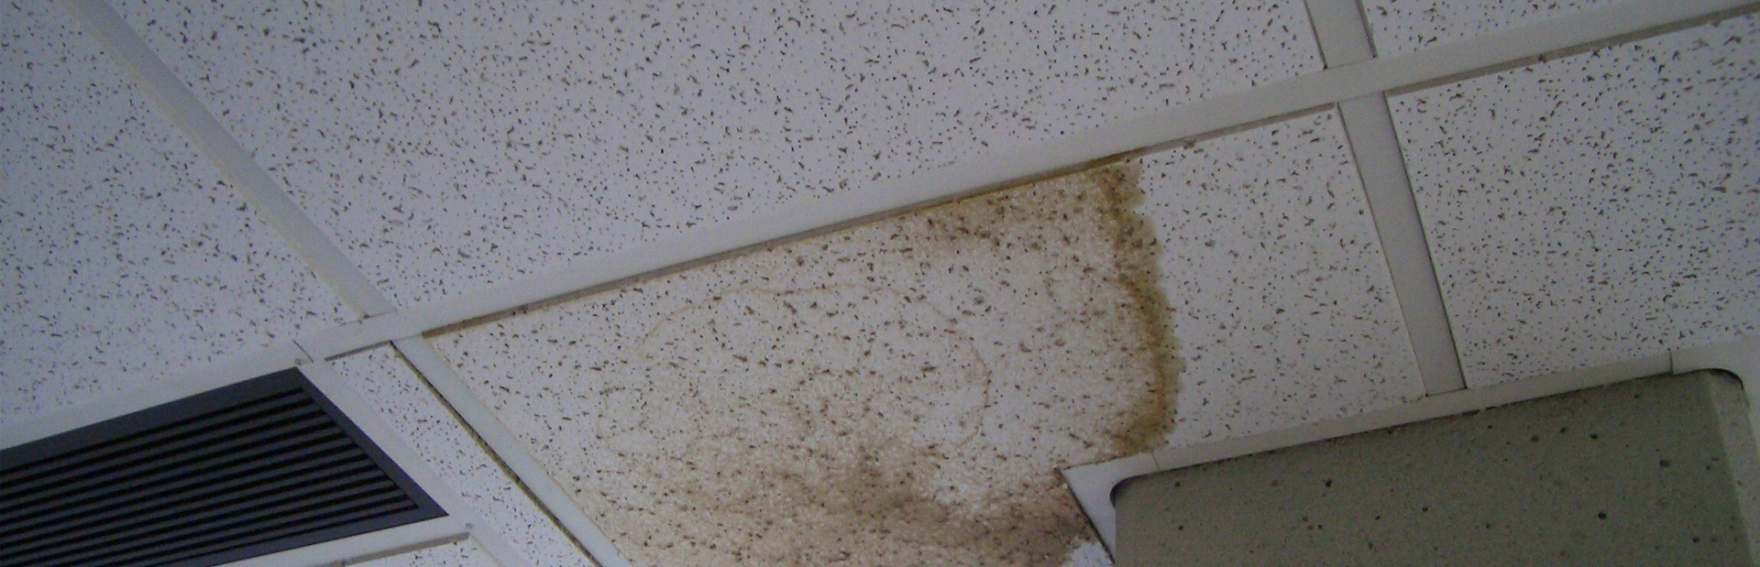 ceiling tile cleaning commercially clean anchorage carpet cleaning